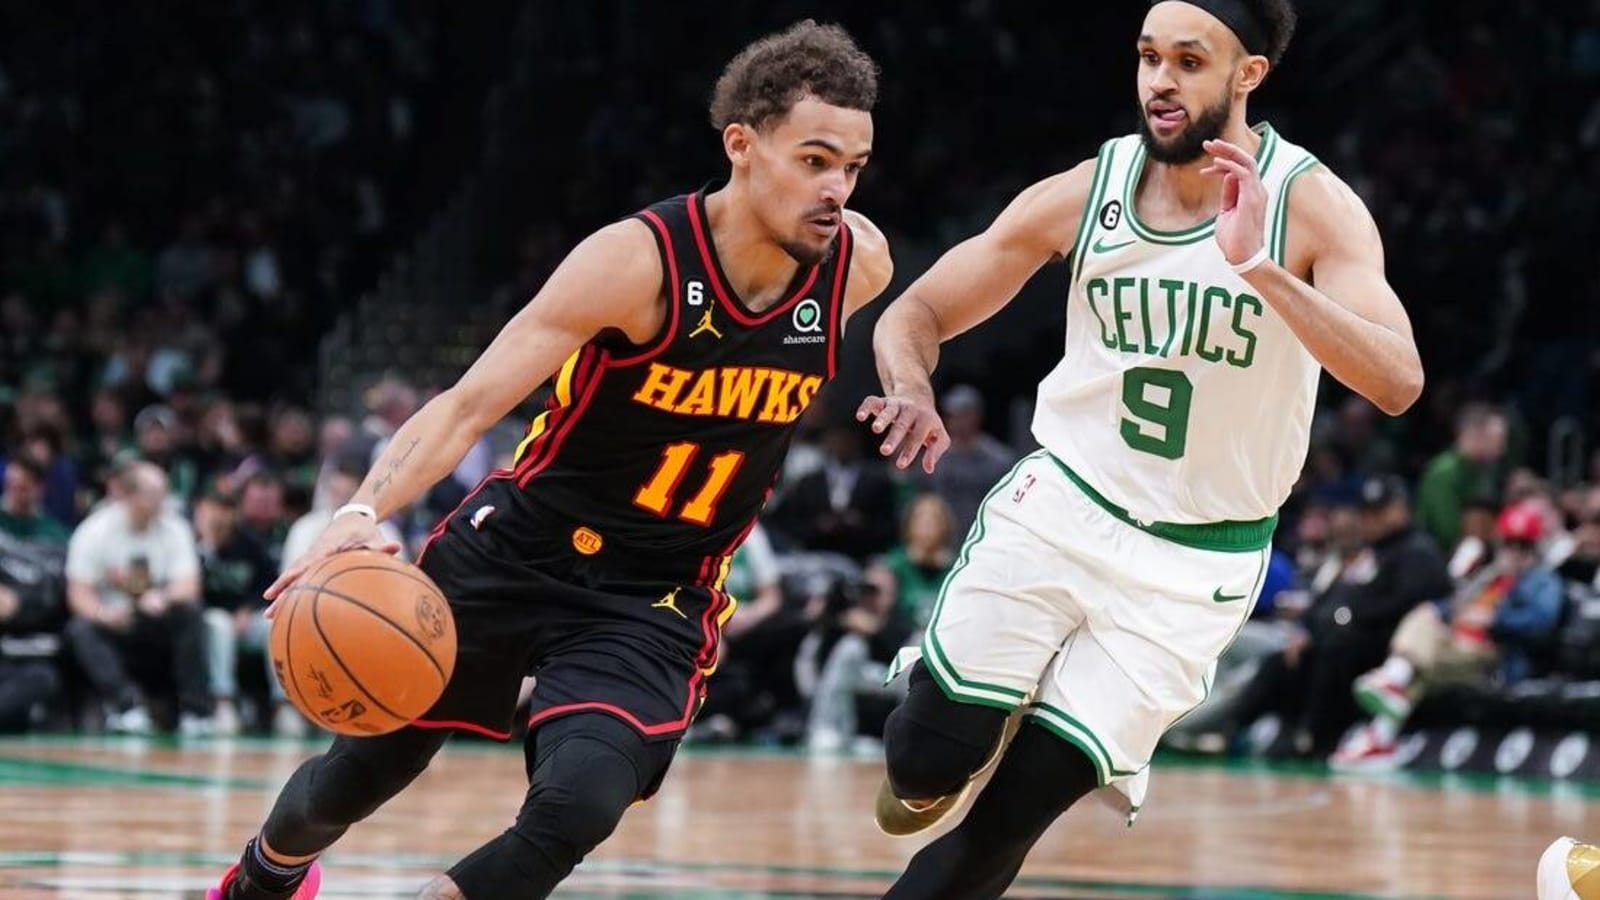 Boston Celtics at Atlanta Hawks Game 3 prediction, pick for 4/21: Hawks need spark from Trae Young